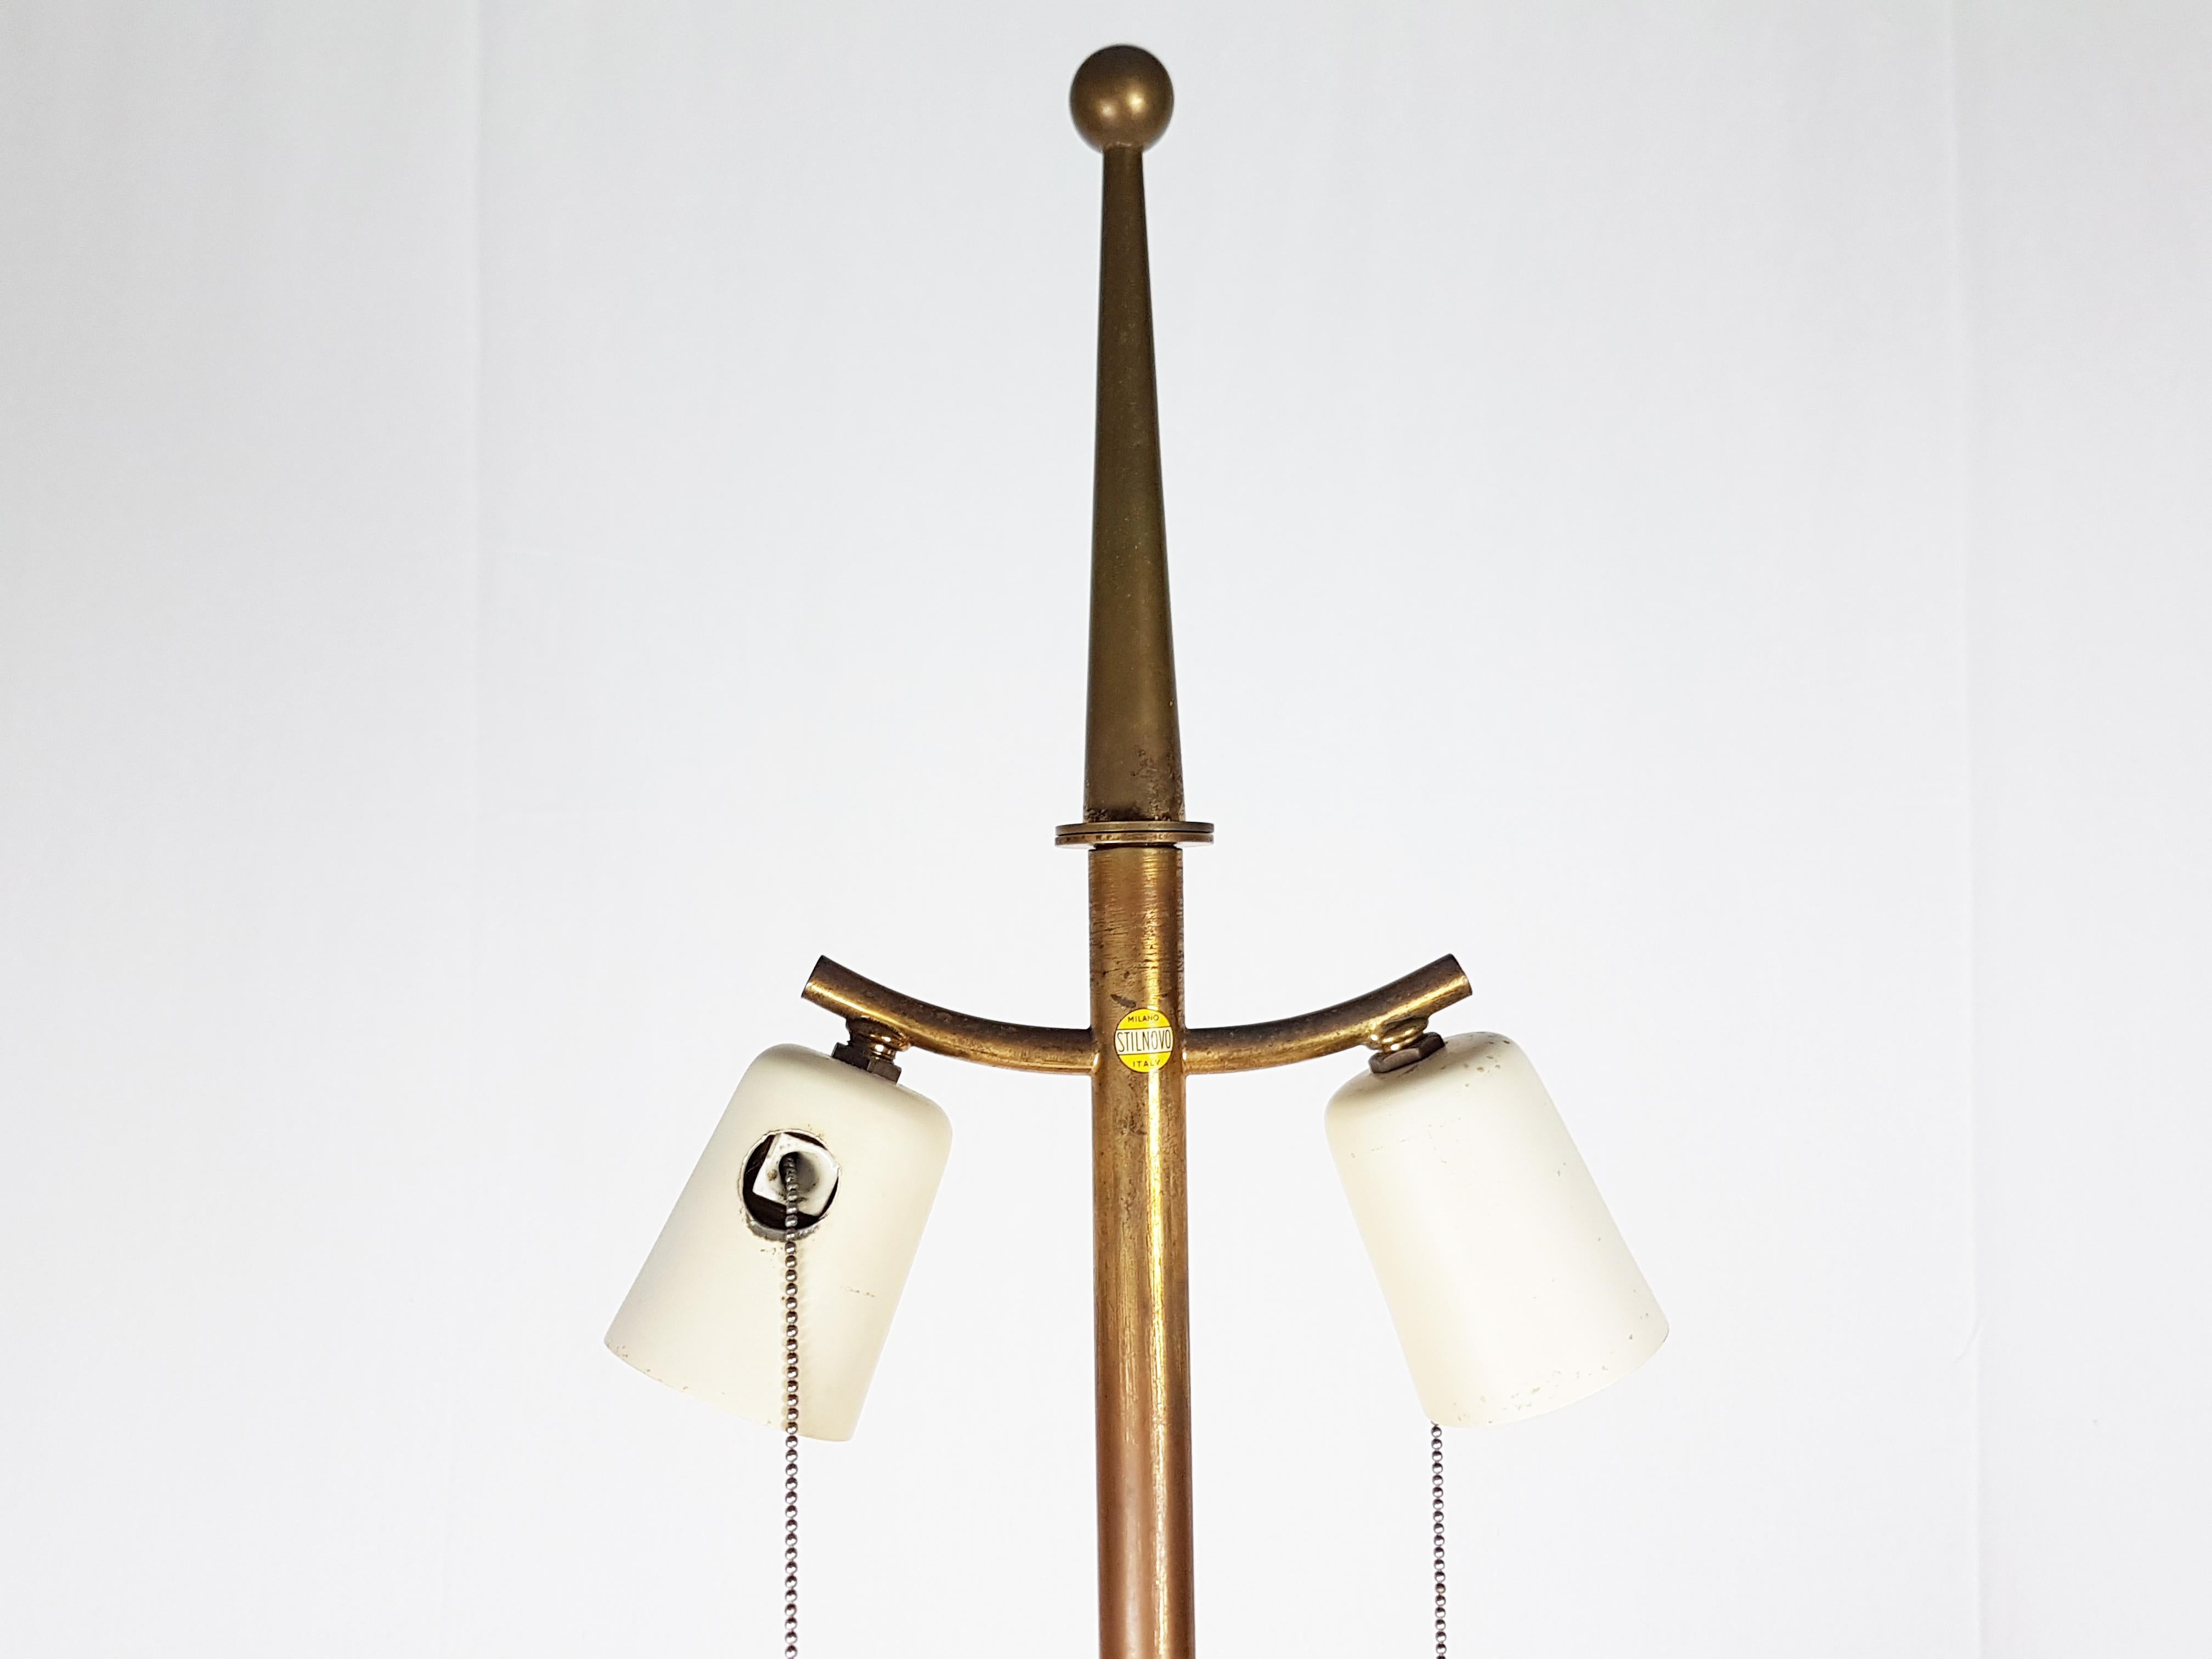 This large table lamp is made of satin opaline glass with brass elements and remains in overall good condition: Oxidation patina on the brass. The switch has been replaced. Lampshade reupholstered in coated fabric.
Equipped with 3 independent